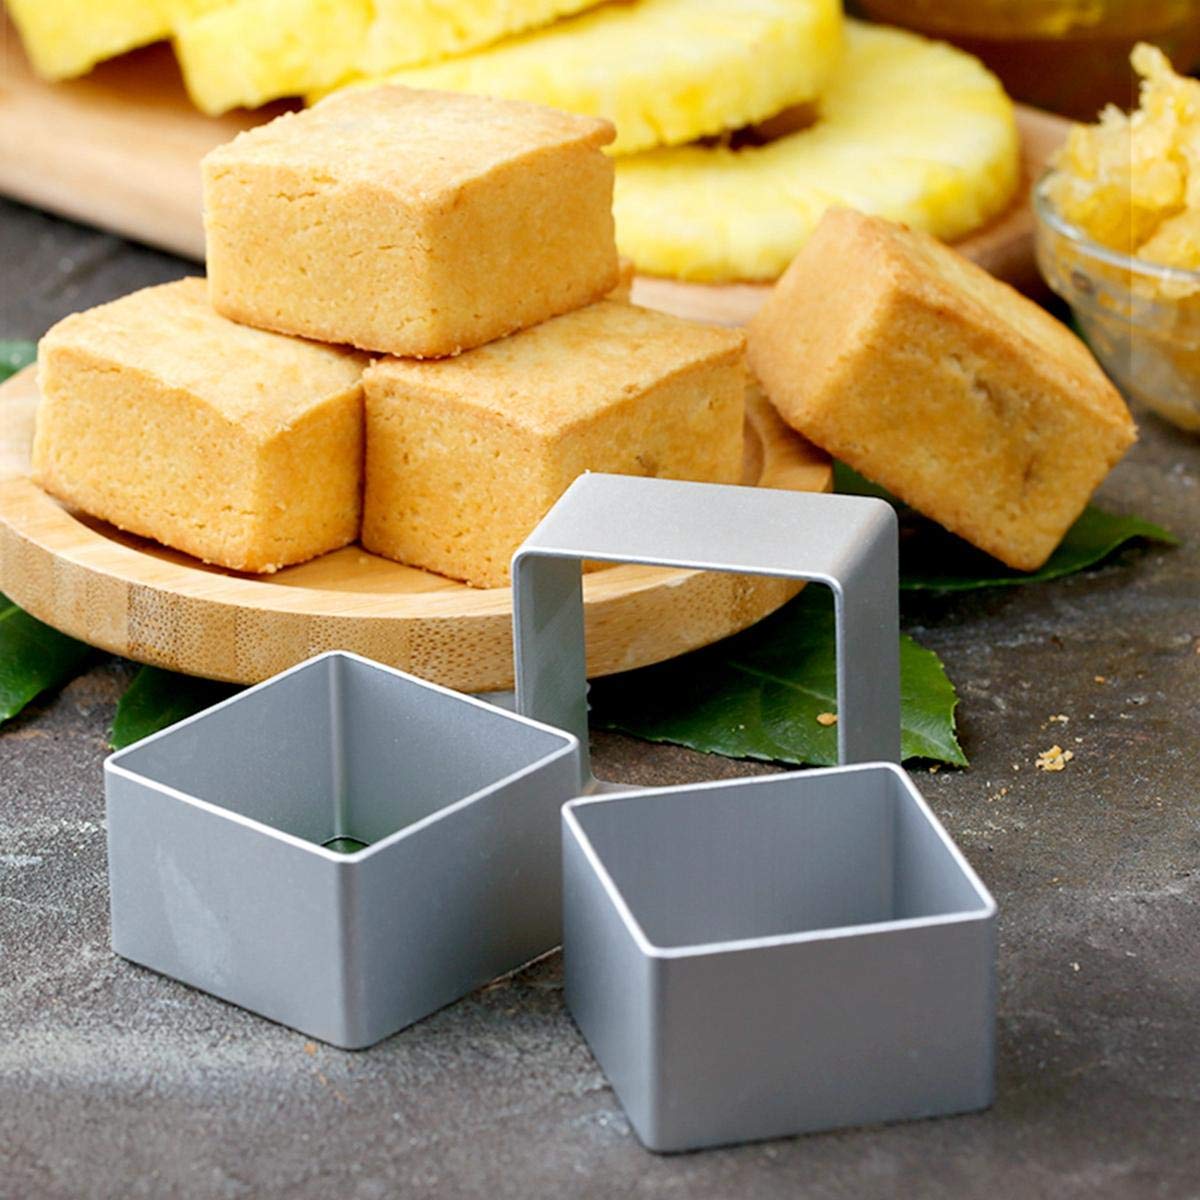 10pcs/Set Rectangle/Ellipse/Pineapple Cake Pie Biscuit Cutter Mold Cutting Press Stamp Molds Stainless Steel Cake Mold Cookie Cutter(Rectangle)